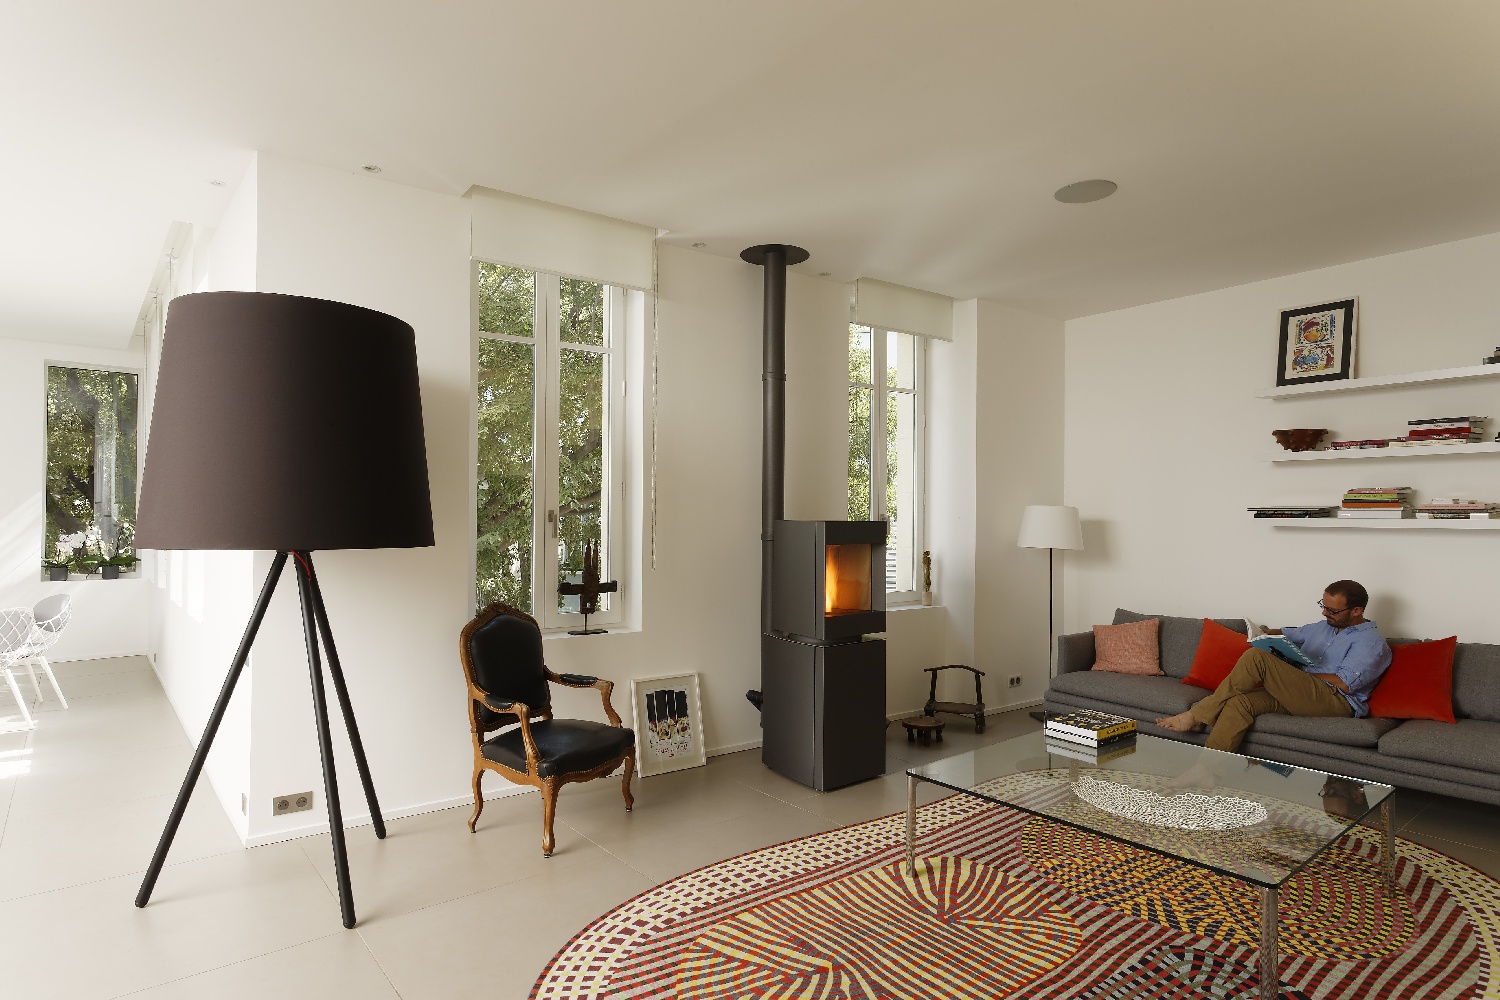 Photography: Daniel Moulinet / Architect : Agence Roulle-Oliveira / Pellet stove installed by Ambiance Chaleur Nîmes